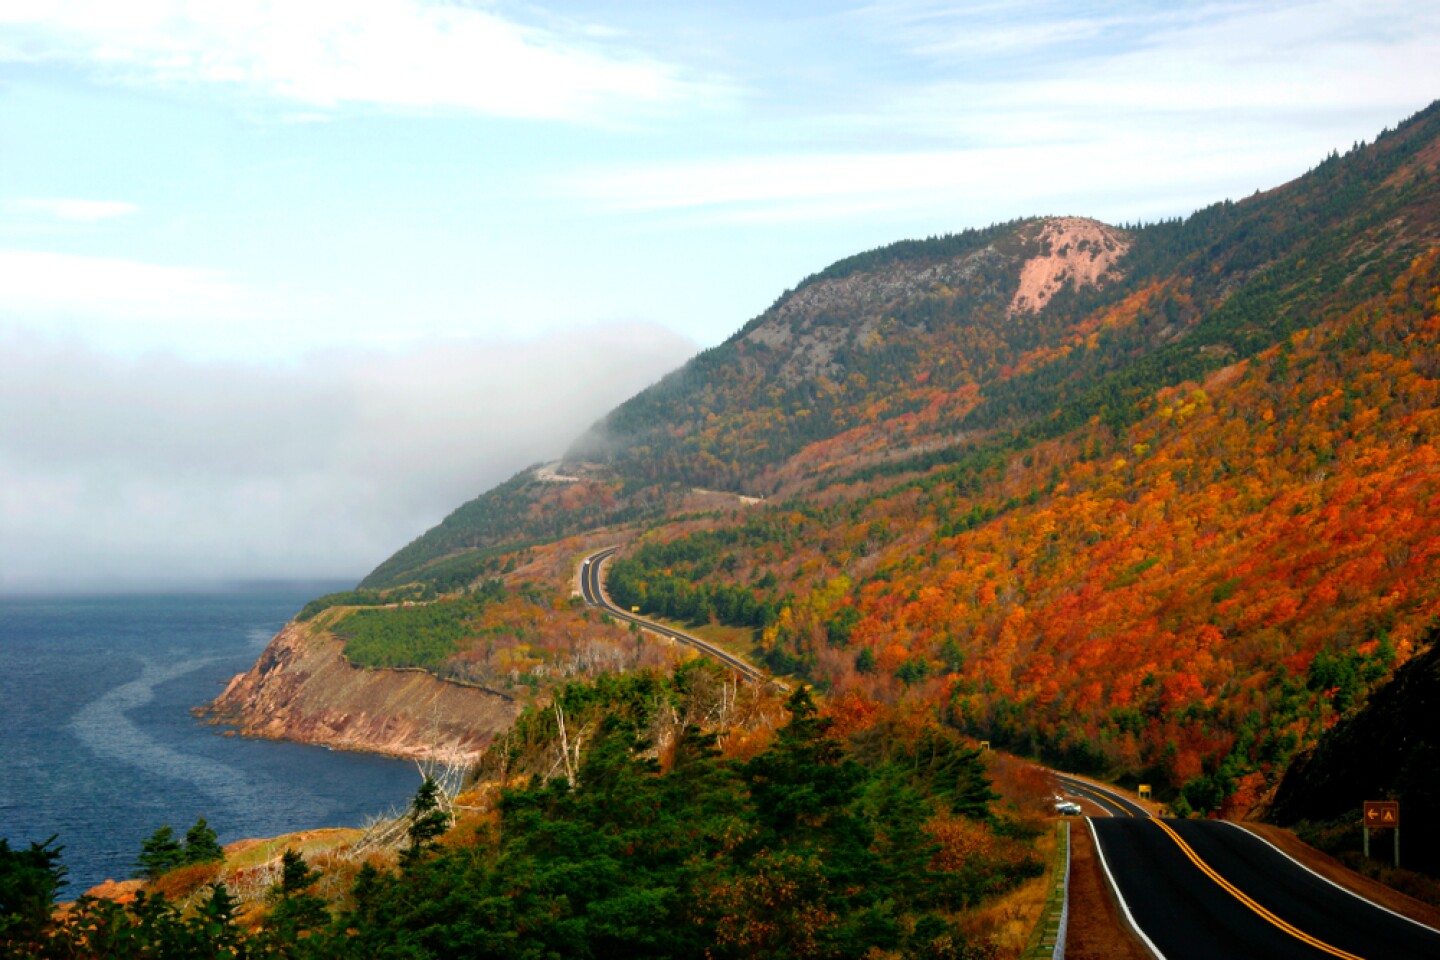 <h2>5. Cape Breton Highlands National Park</h2> <p><i>Nova Scotia</i></p> <p><a class="Link" href="https://www.pc.gc.ca/en/pn-np/ns/cbreton/" rel="noopener">Cape Breton Highlands National Park</a> in northern Nova Scotia offers plenty to do across its mix of highland and ocean landscapes. You can enjoy much of the scenery in this 360-square-mile park without leaving the car, with the Route 30 loop (also known as the Cabot Trail) bracing the shores of the Atlantic on one side and the Gulf of St. Lawrence on the other. Drive slowly, and not just for the coastal views that greet you at every mile—this is whale country, and particularly lucky visitors may get a glimpse of a minke or pilot whale coming up for air. You can also cycle part of the 185-mile loop course or opt to hike some of the park’s 26 scenic trails.</p> <h3>How to get to Cape Breton Highlands National Park</h3> <p>This part of Nova Scotia is most easily accessed through Halifax airport, which connects directly to many hubs on the continent. From there, you’ll drive around 150 miles north to get to Cape Breton Island. Travel north another 65 miles on Nova Scotia Highway 105 and you’ll reach Cabot Trail. This last 50-mile leg to the park is about an hour-long drive.</p>